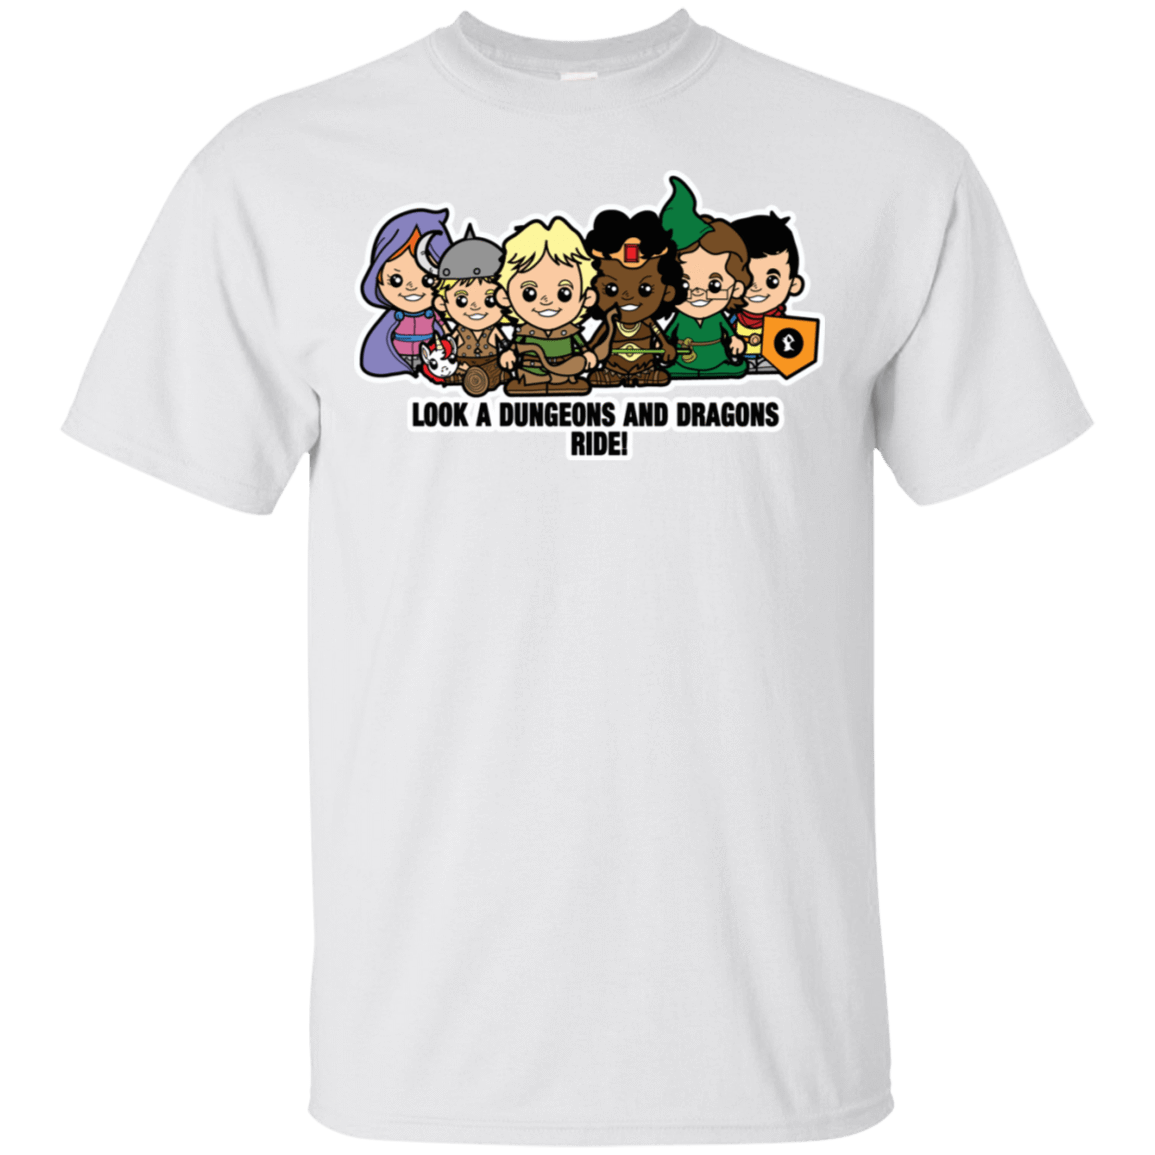 T-Shirts White / S Lil Dungeons and Dragons T-Shirt